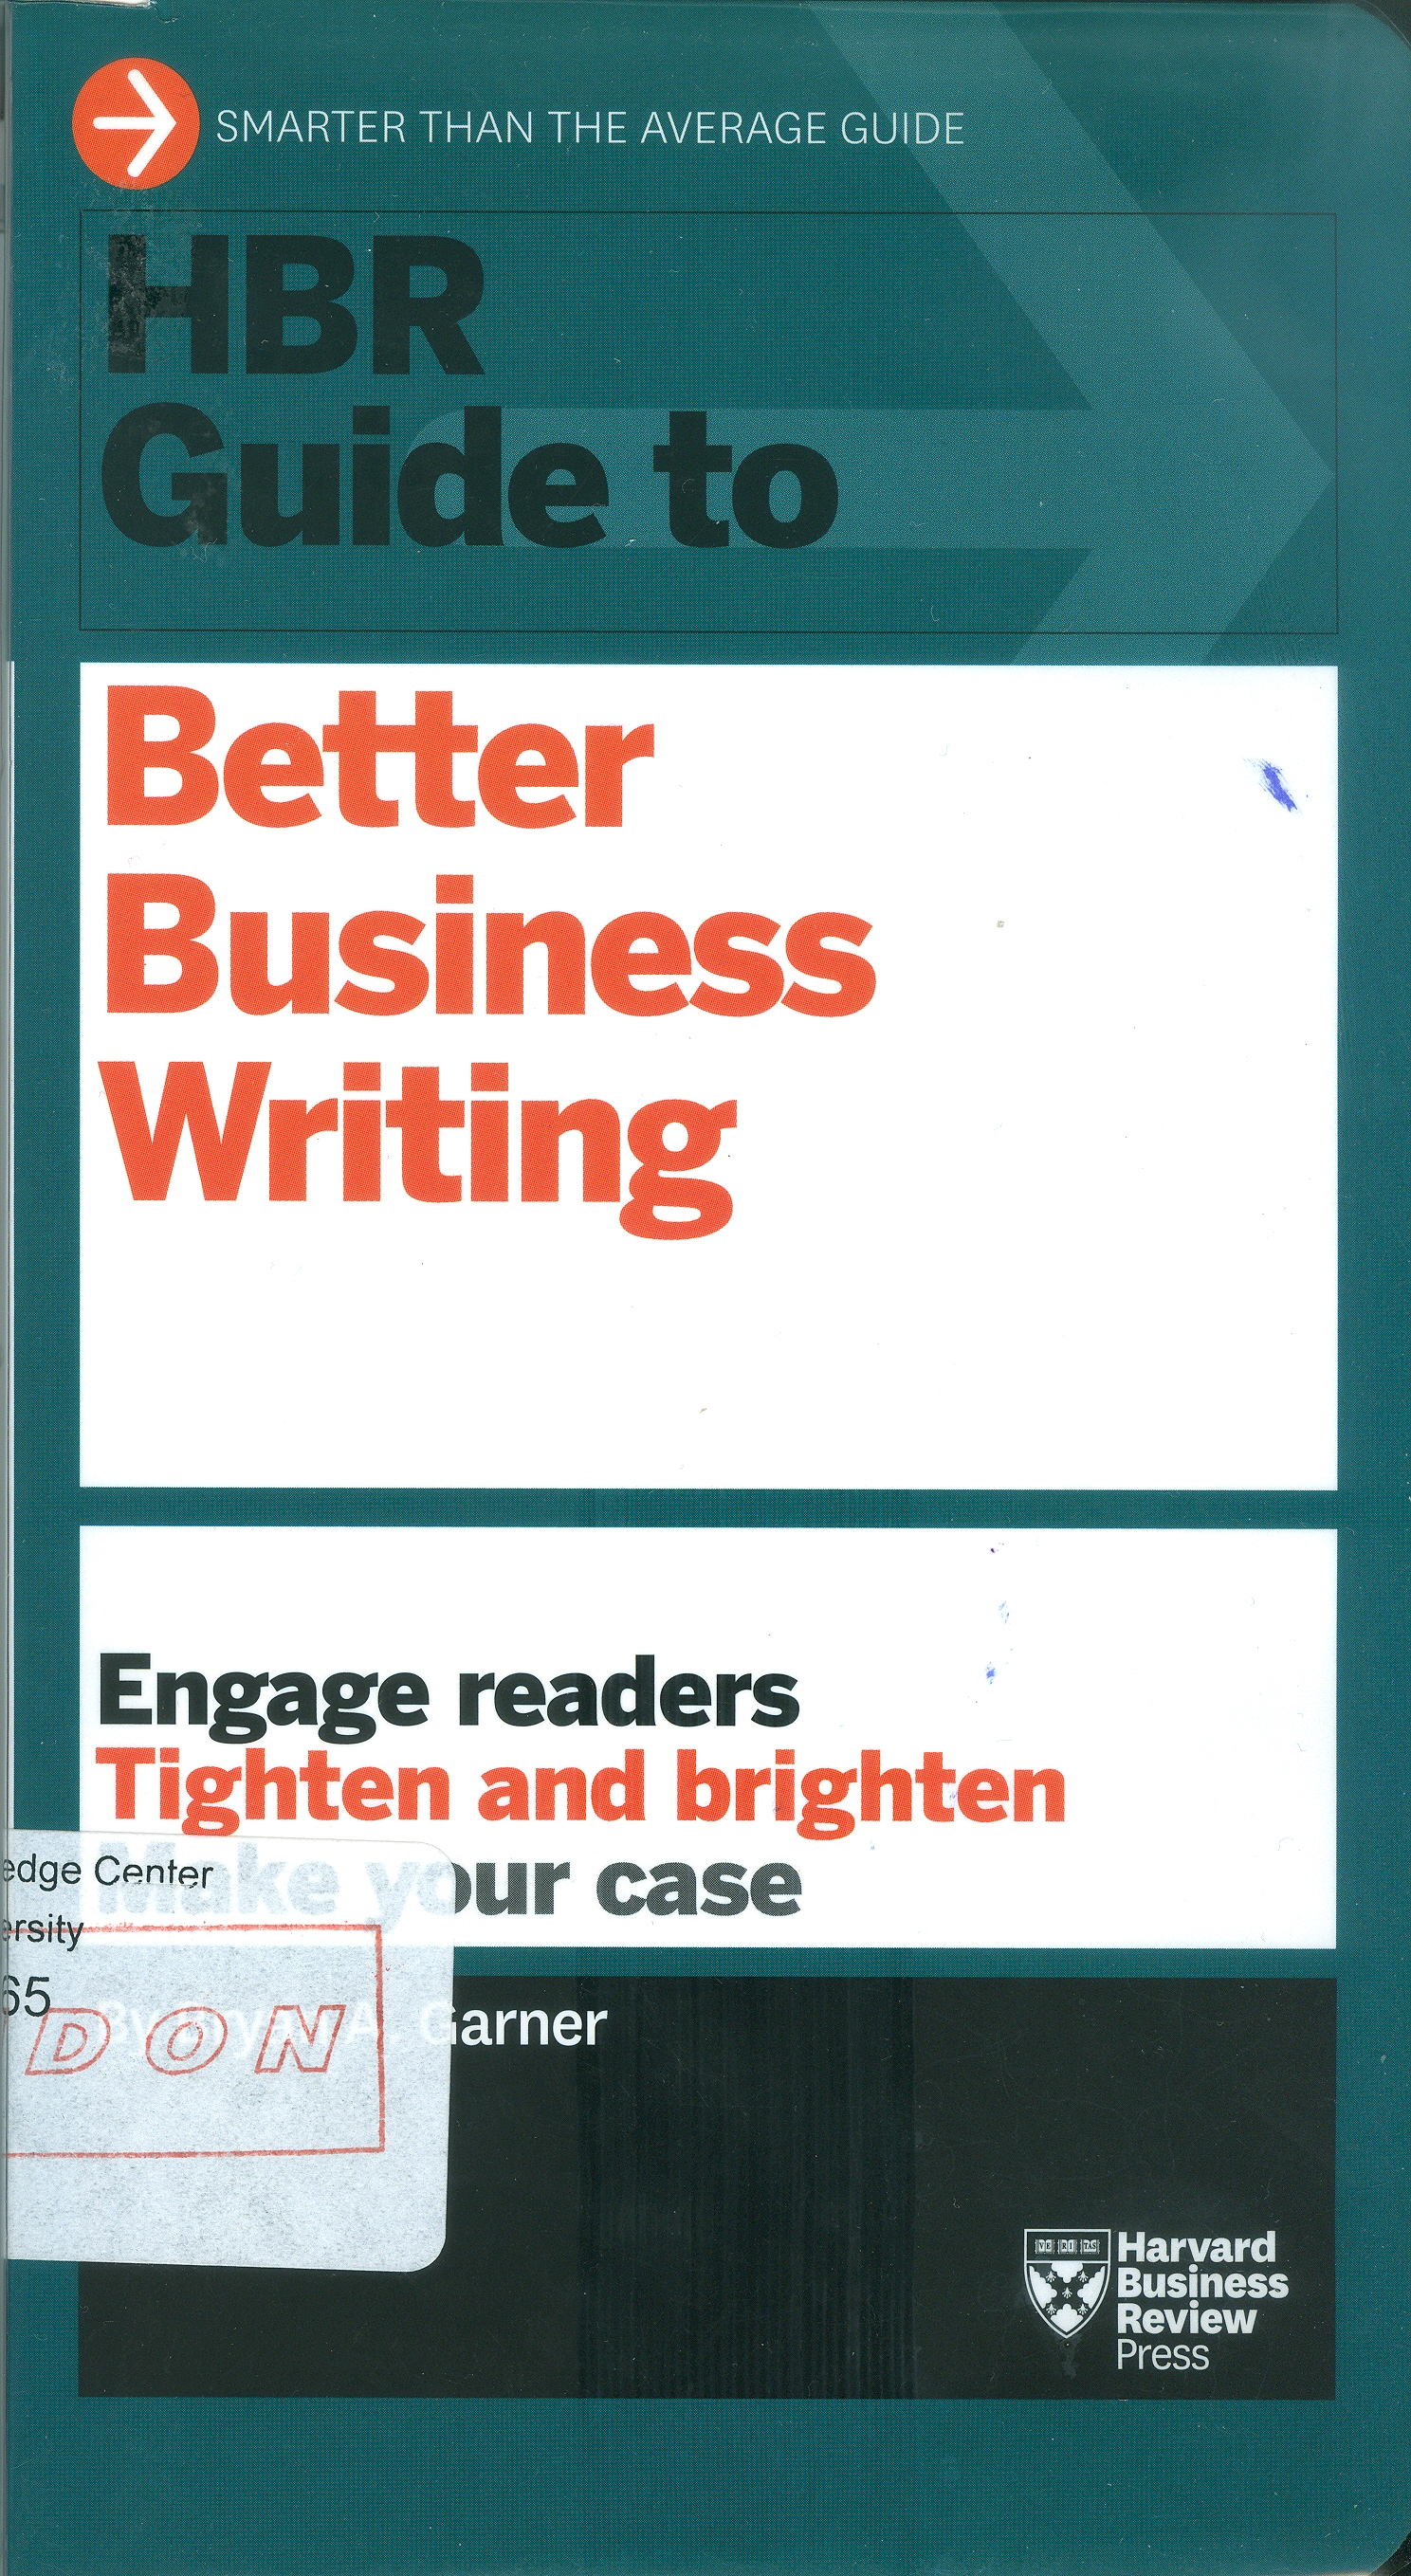 hbr guide to better business writing.jpg